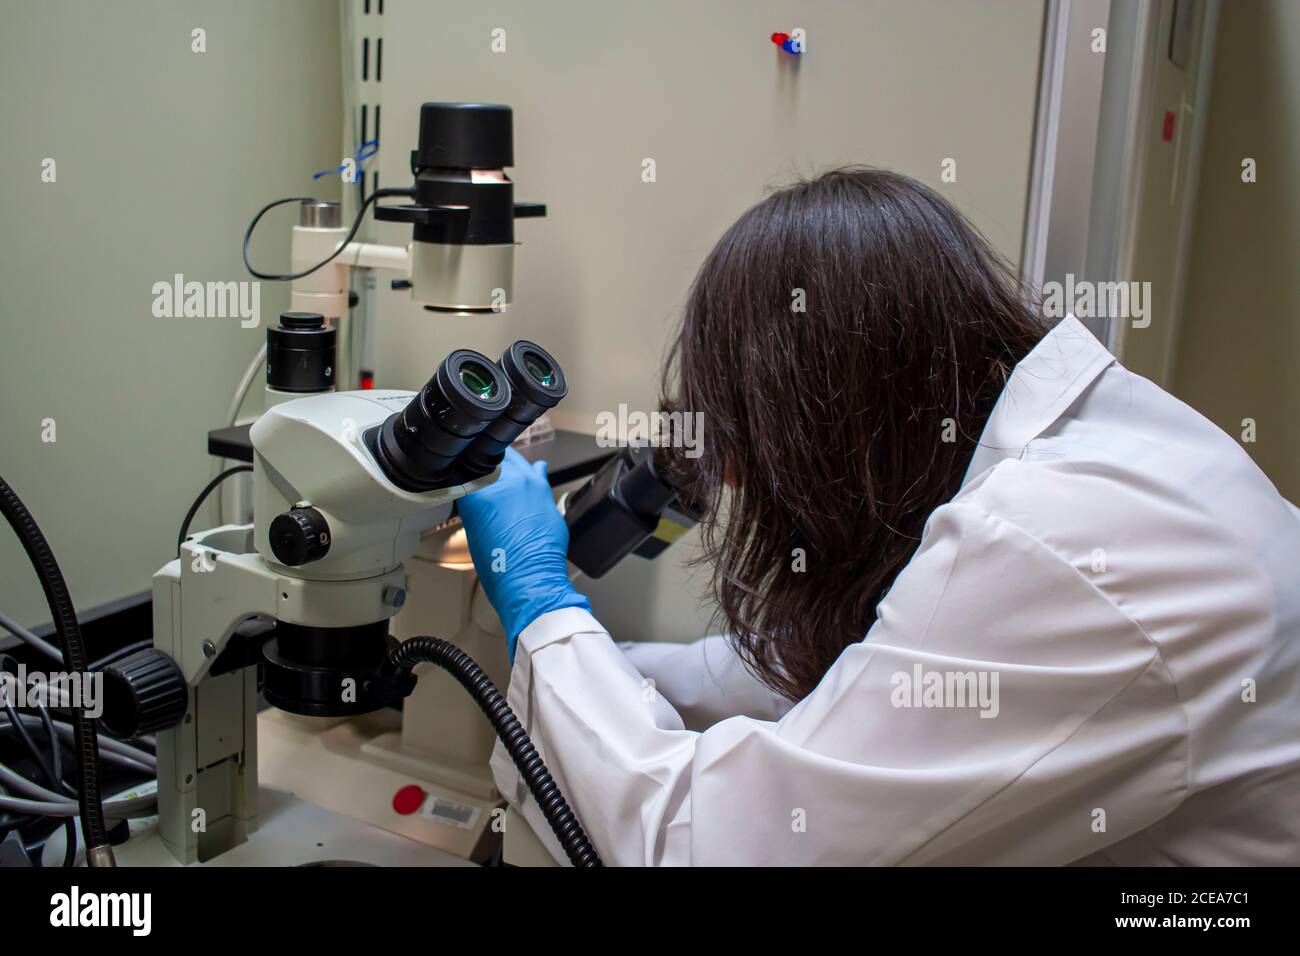 A woman researcher wearing white laboratory coat and nitrile gloves is looking at a biological specimen under inverted light microscope at a medical l Stock Photo